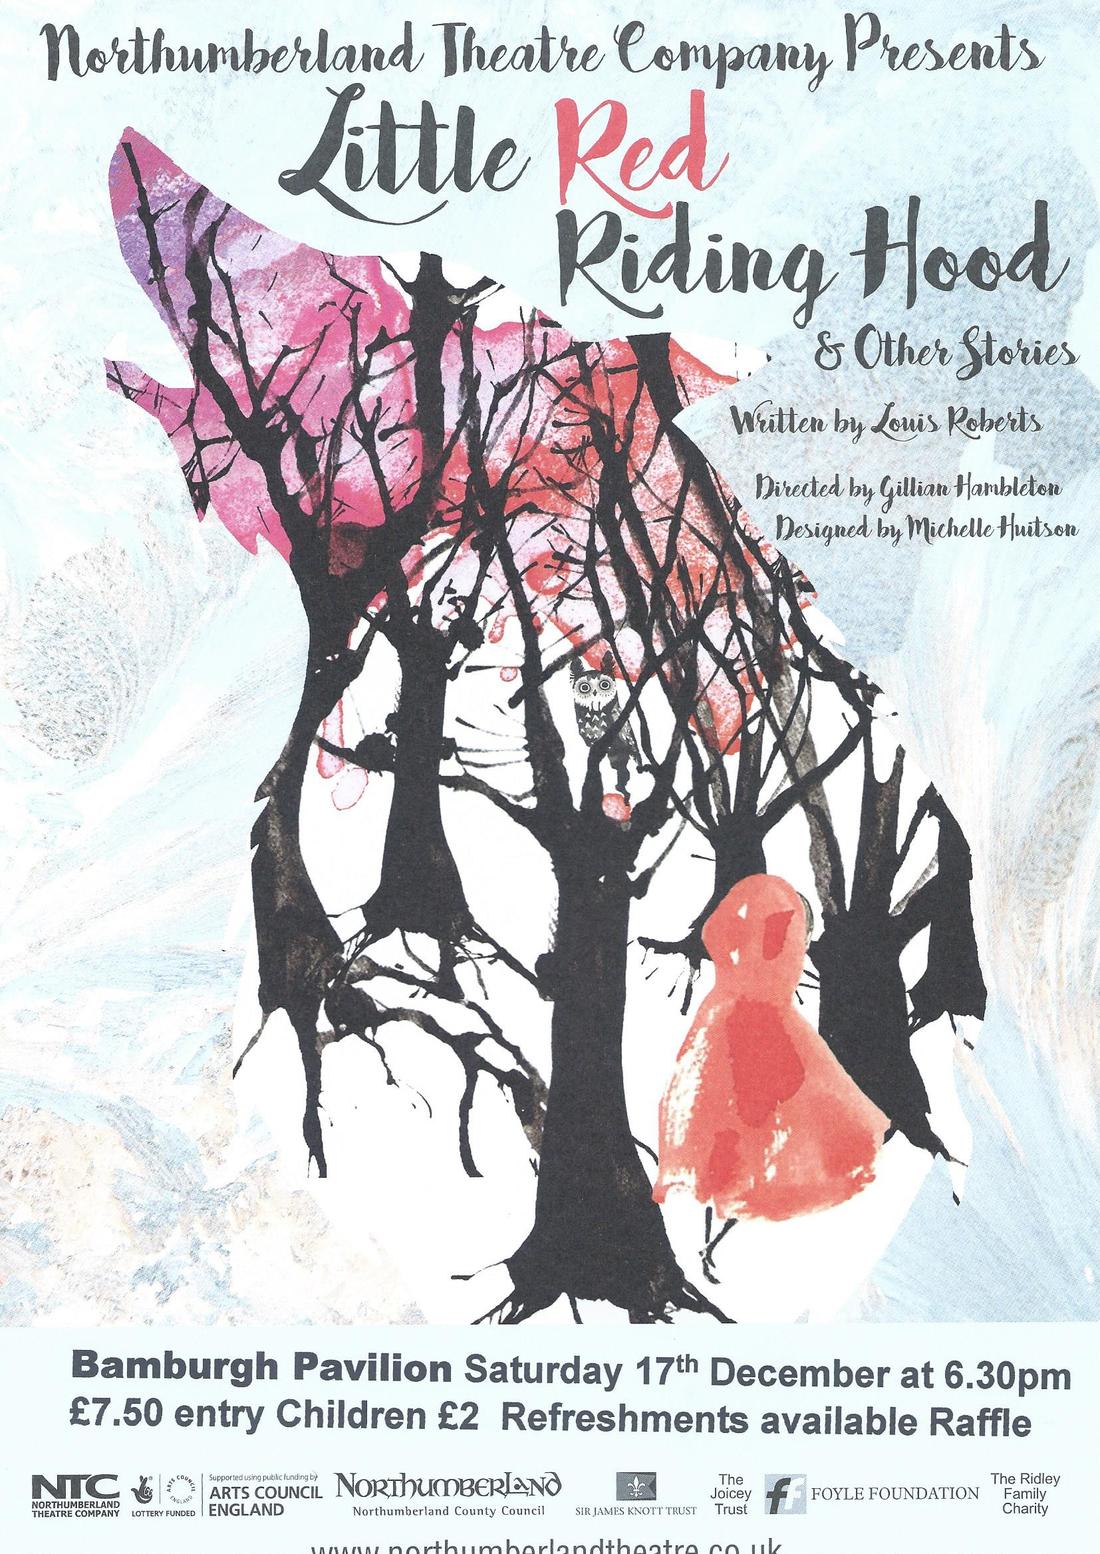 Northumberland Theatre Company Presents Little Red Riding Hood 